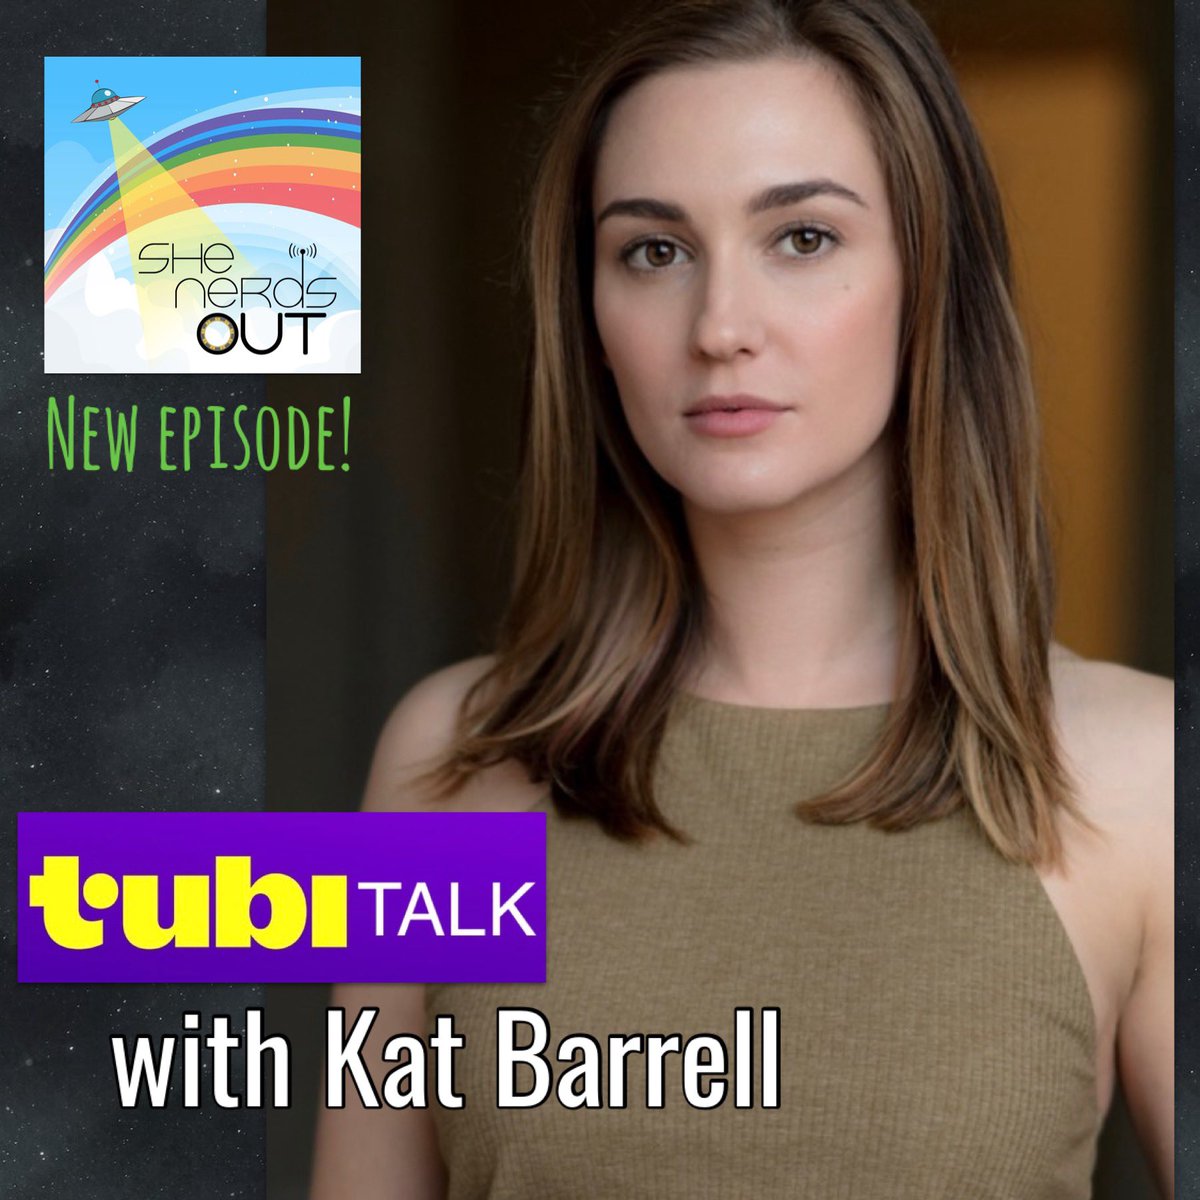 @KatBarrell is back (with a Vengeance?!?)! In this very special Earpisode, Kat helps us celebrate our 5th SNOPiversary! We talk about our mutual love of @Tubi, Hallmark's Shifting Gears & the Scrofano/Barrell co-directing debut coming this Spring! Link below! #WynonnaEarp #Tubi